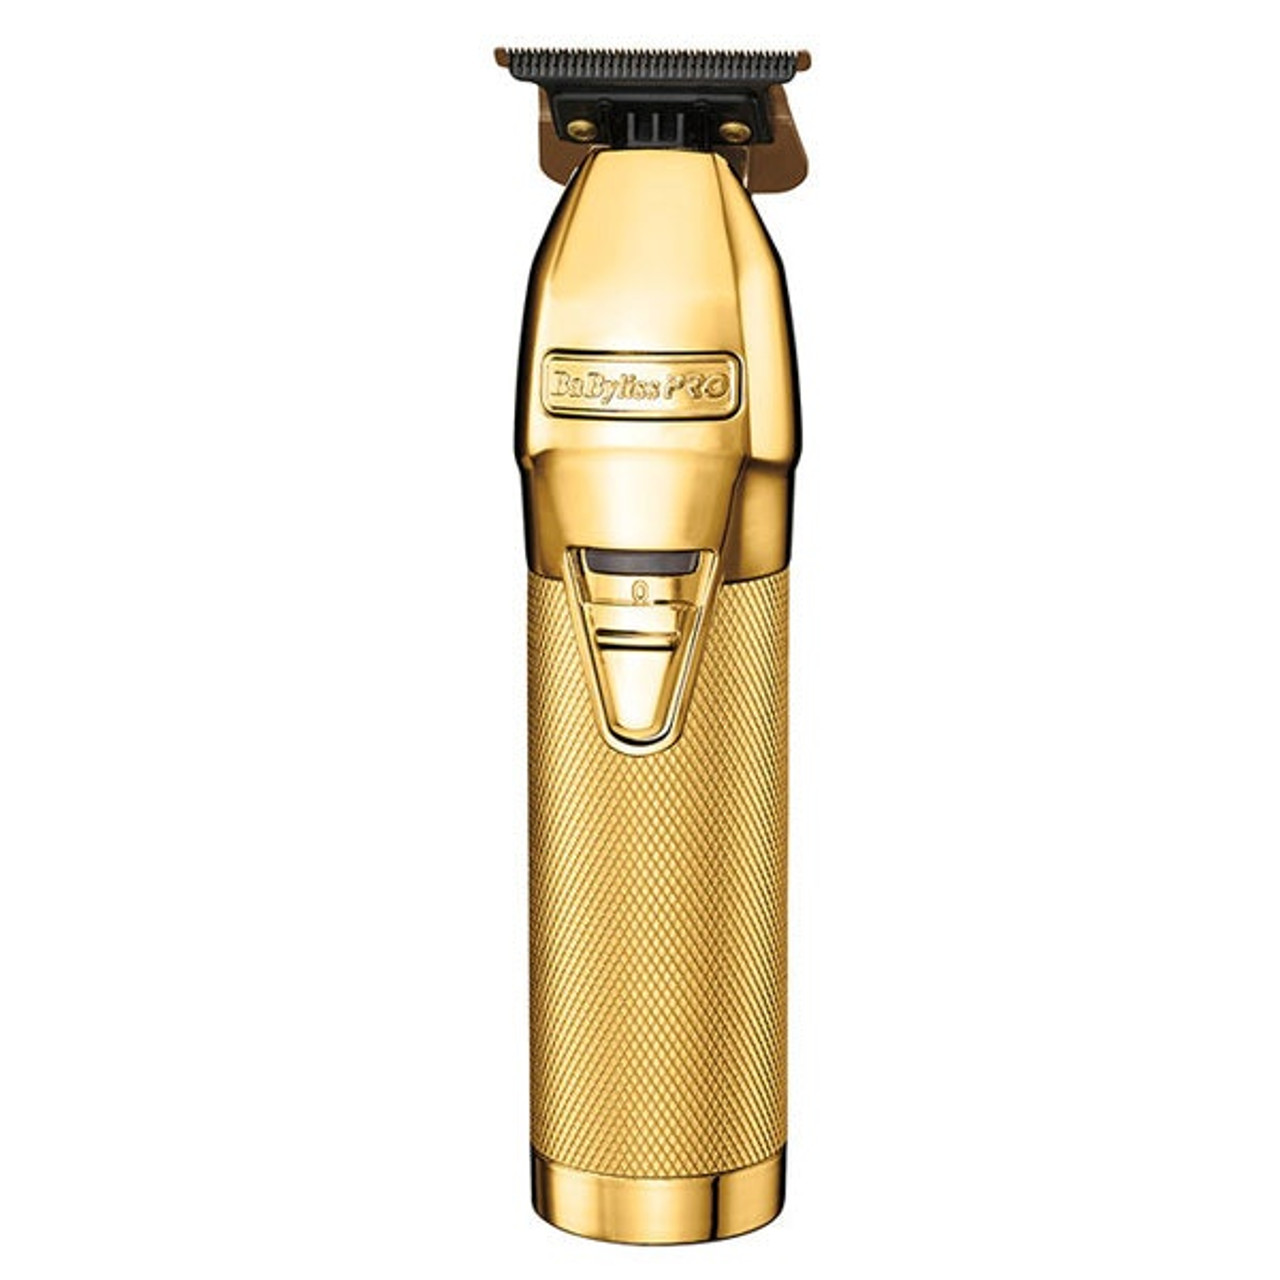 https://cdn11.bigcommerce.com/s-erqth8a135/images/stencil/1280x1280/products/192/2529/babyliss-gold-trimmer__75151.1632353505.jpg?c=1